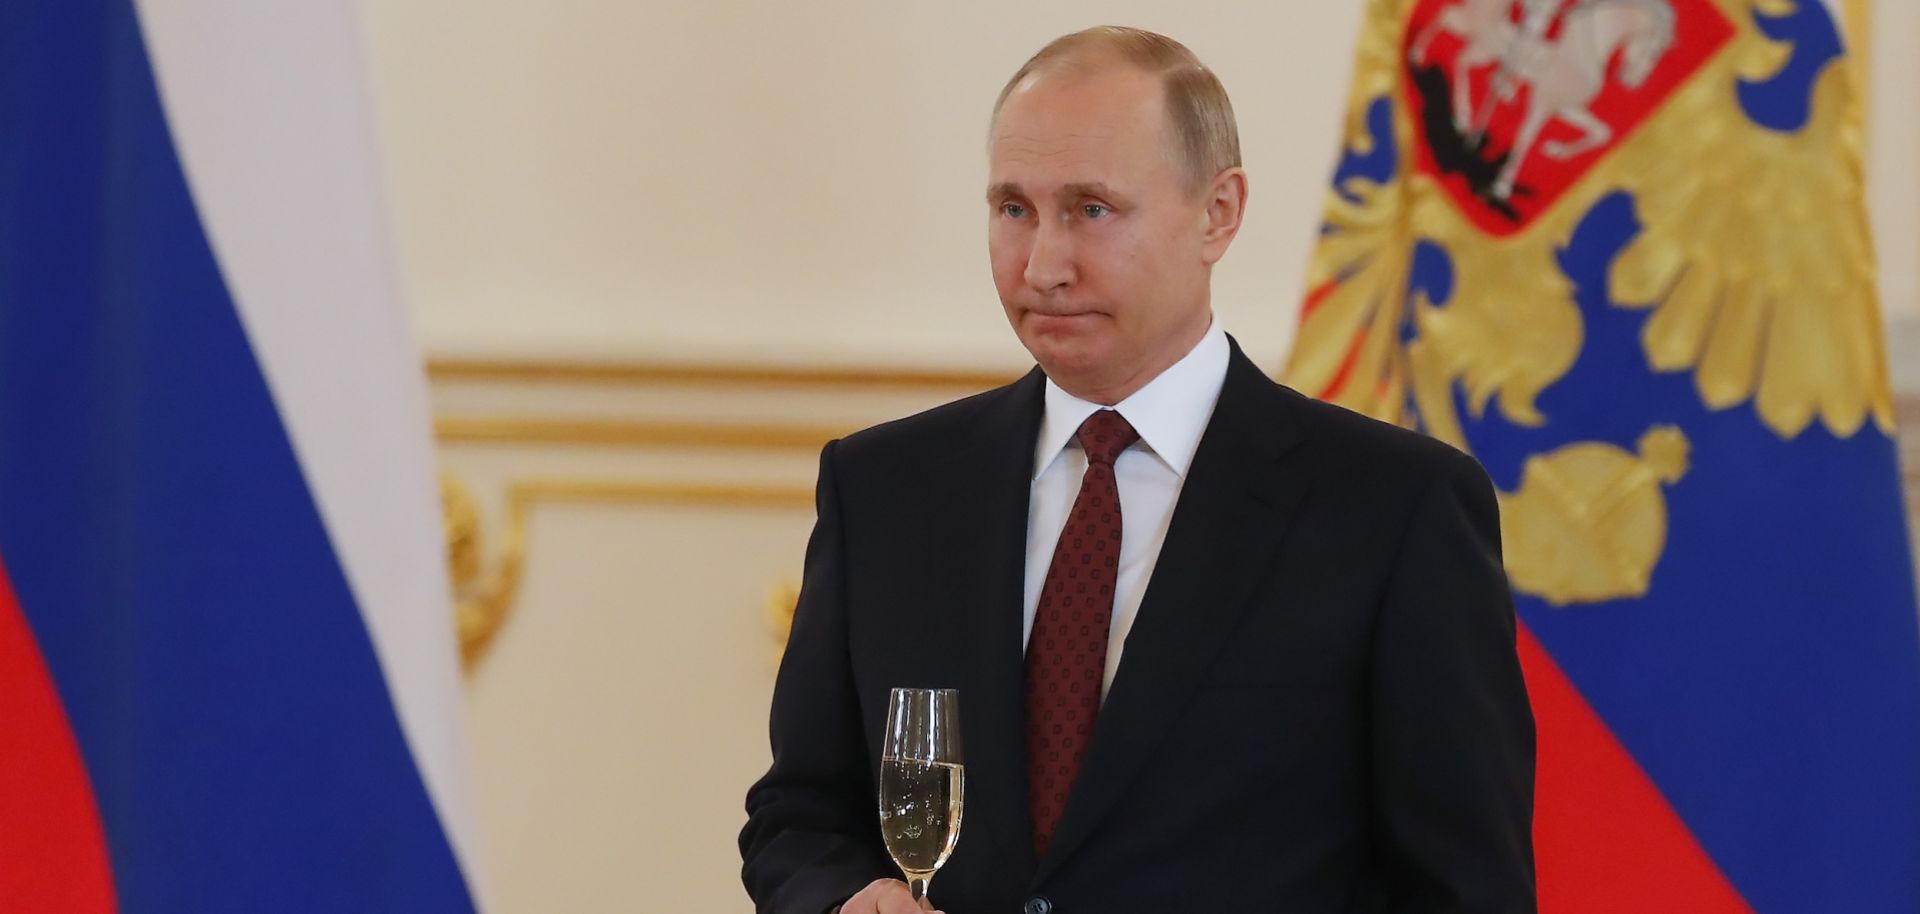 Russian President Vladimir Putin, shown here at the Kremlin in Moscow on April 11, 2018, begins his fourth term on May 7.